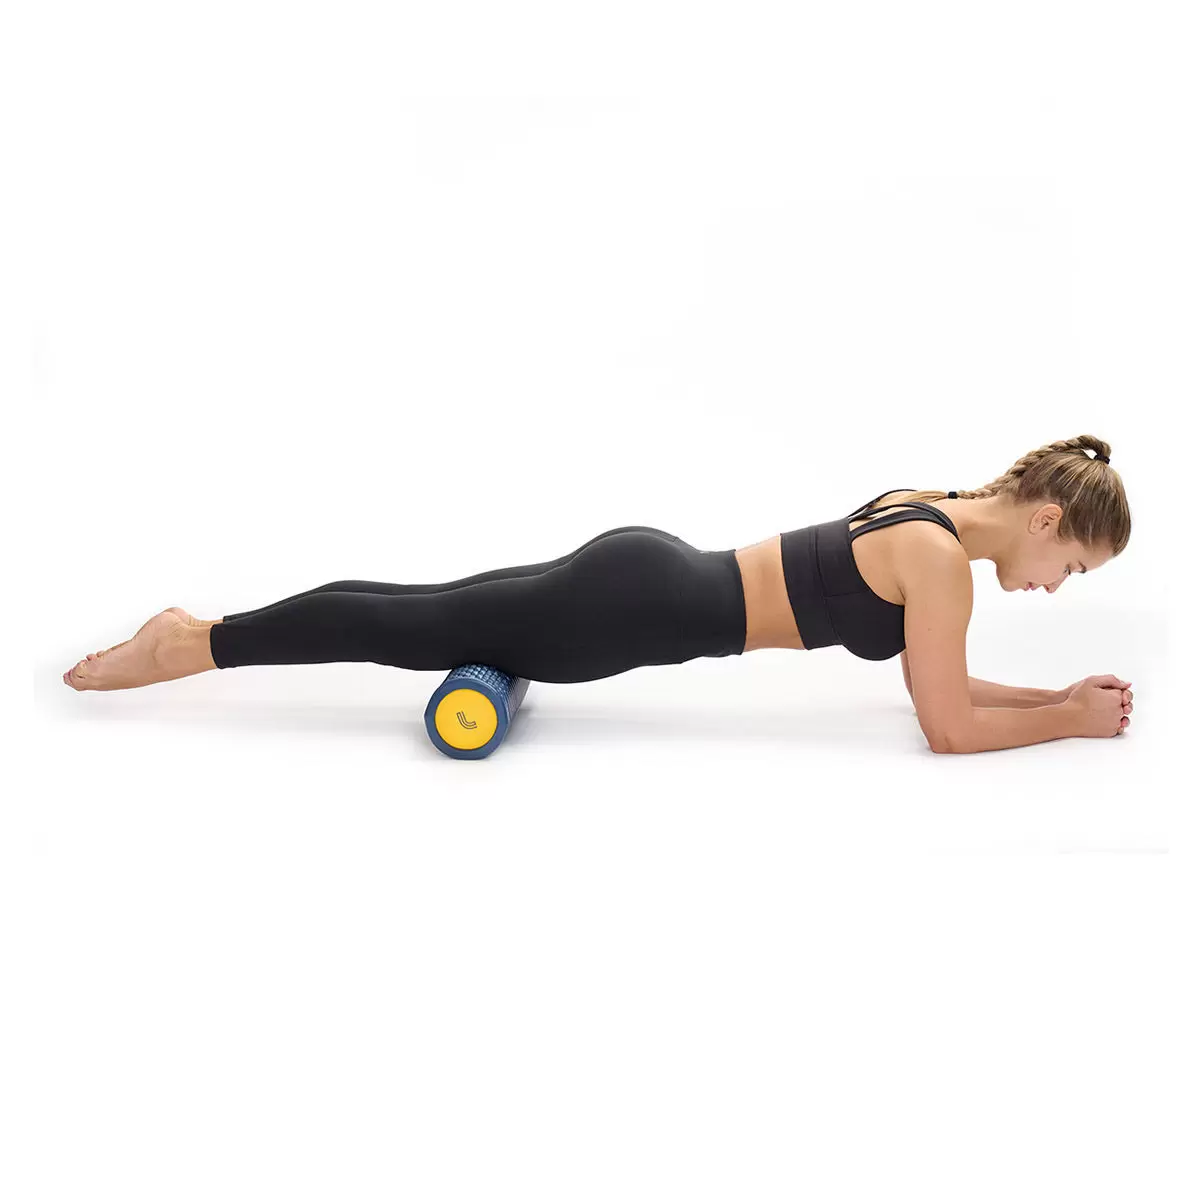 Costco Deals - 🧘‍♀️This @lole foam roller is awesome! Great for stretching  after or before a #workout!! Only $19.99 #costcodeals #costco #foamroller  #exercise #lole